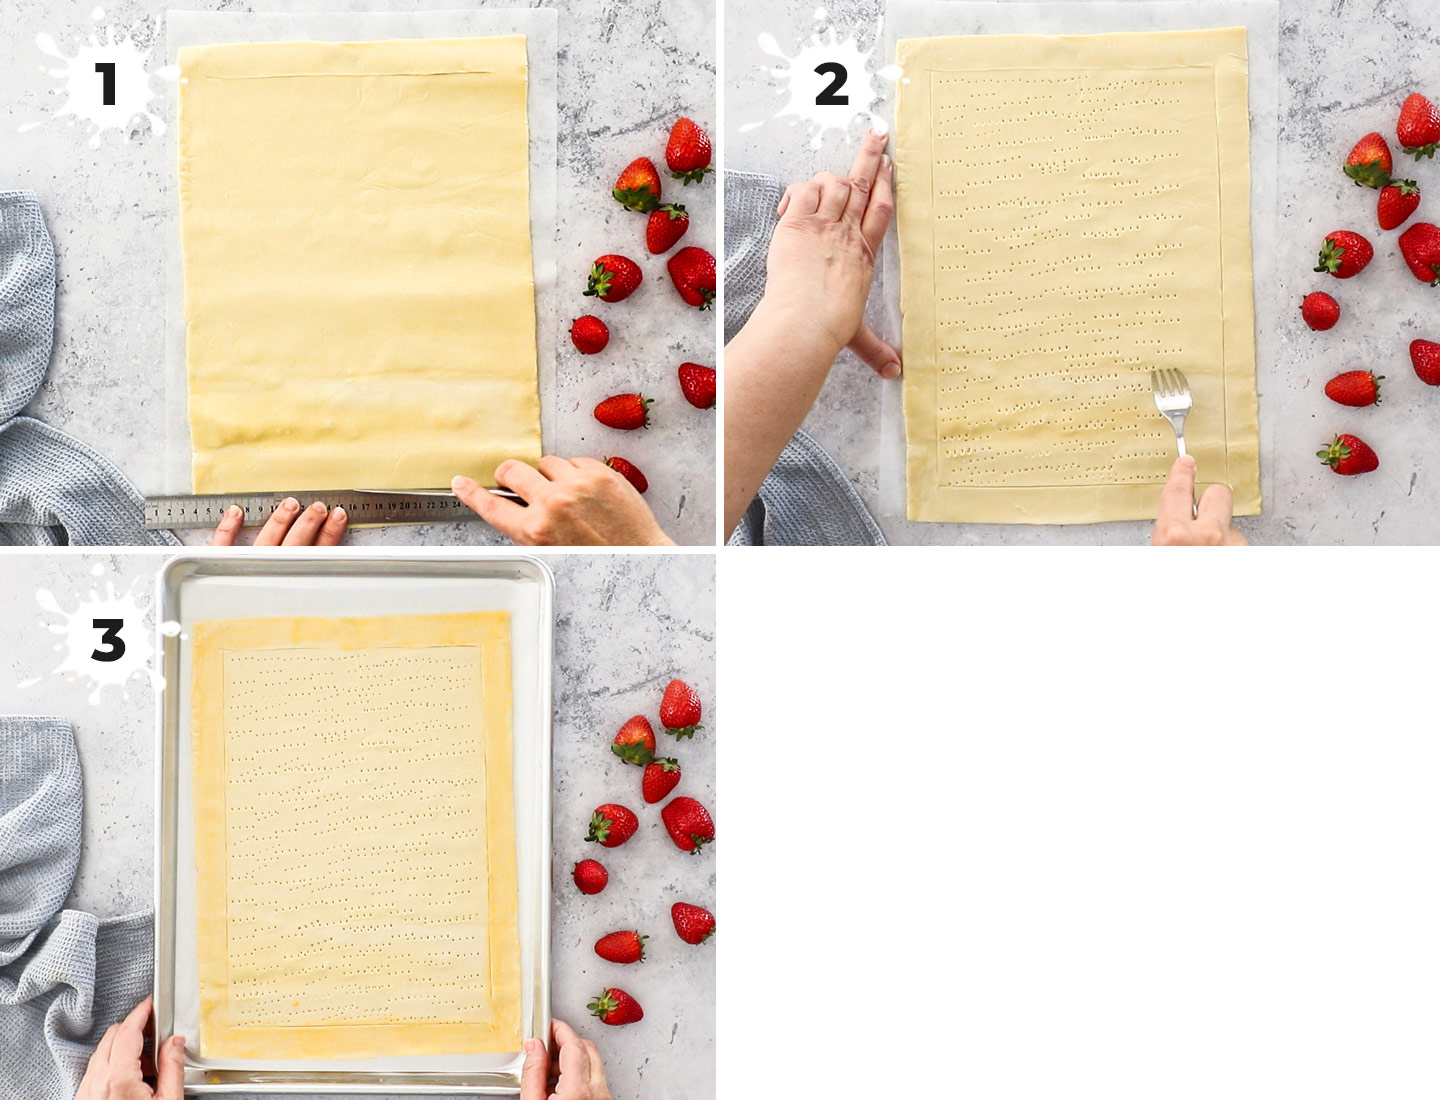 A collage showing how to prepare the pastry.